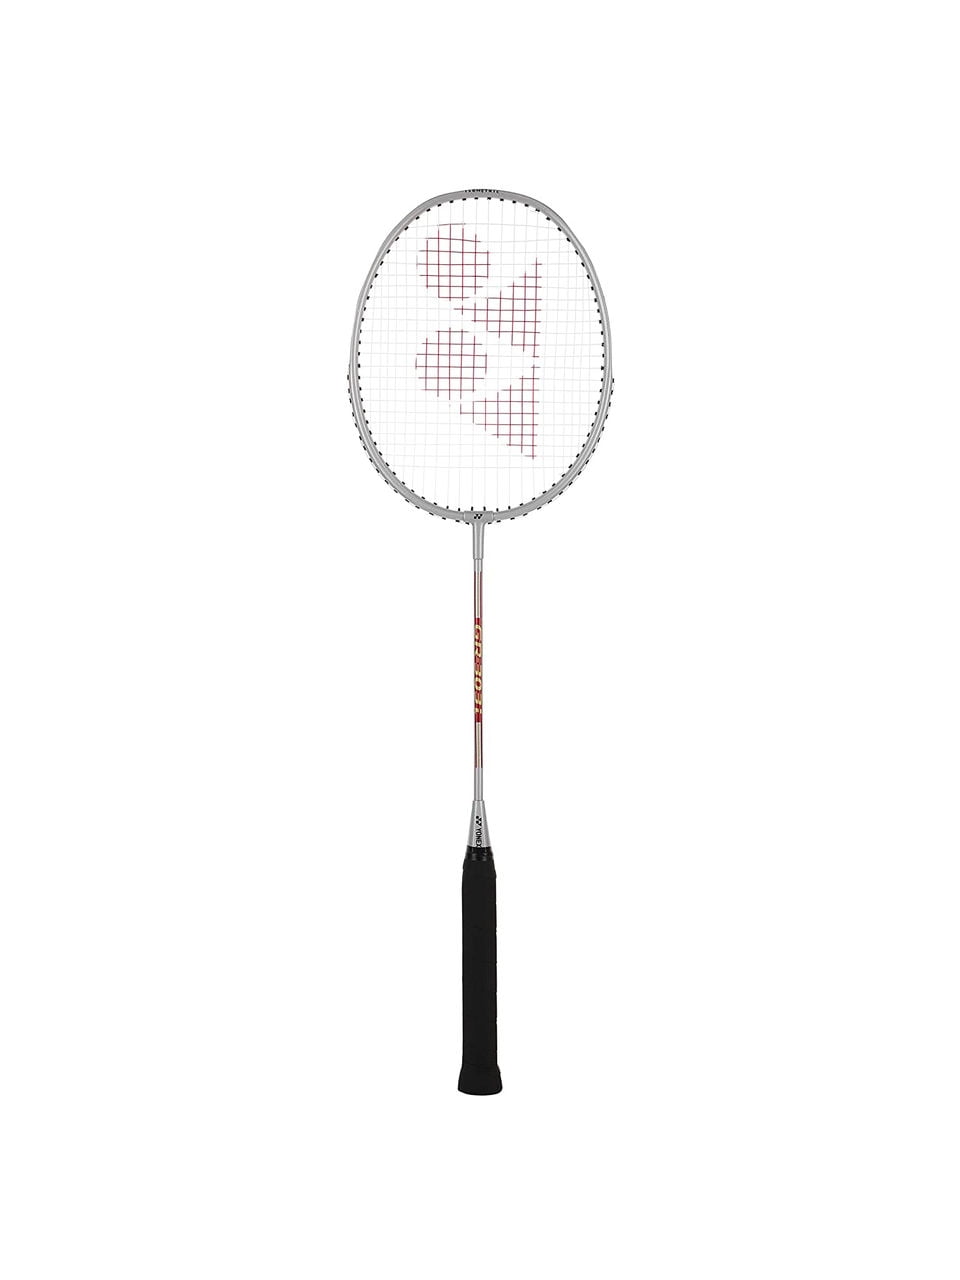 YONEX GR 303 Badminton Racket 2018 Professional Beginner Practice Racquet with Face Cover, White Pack of 2